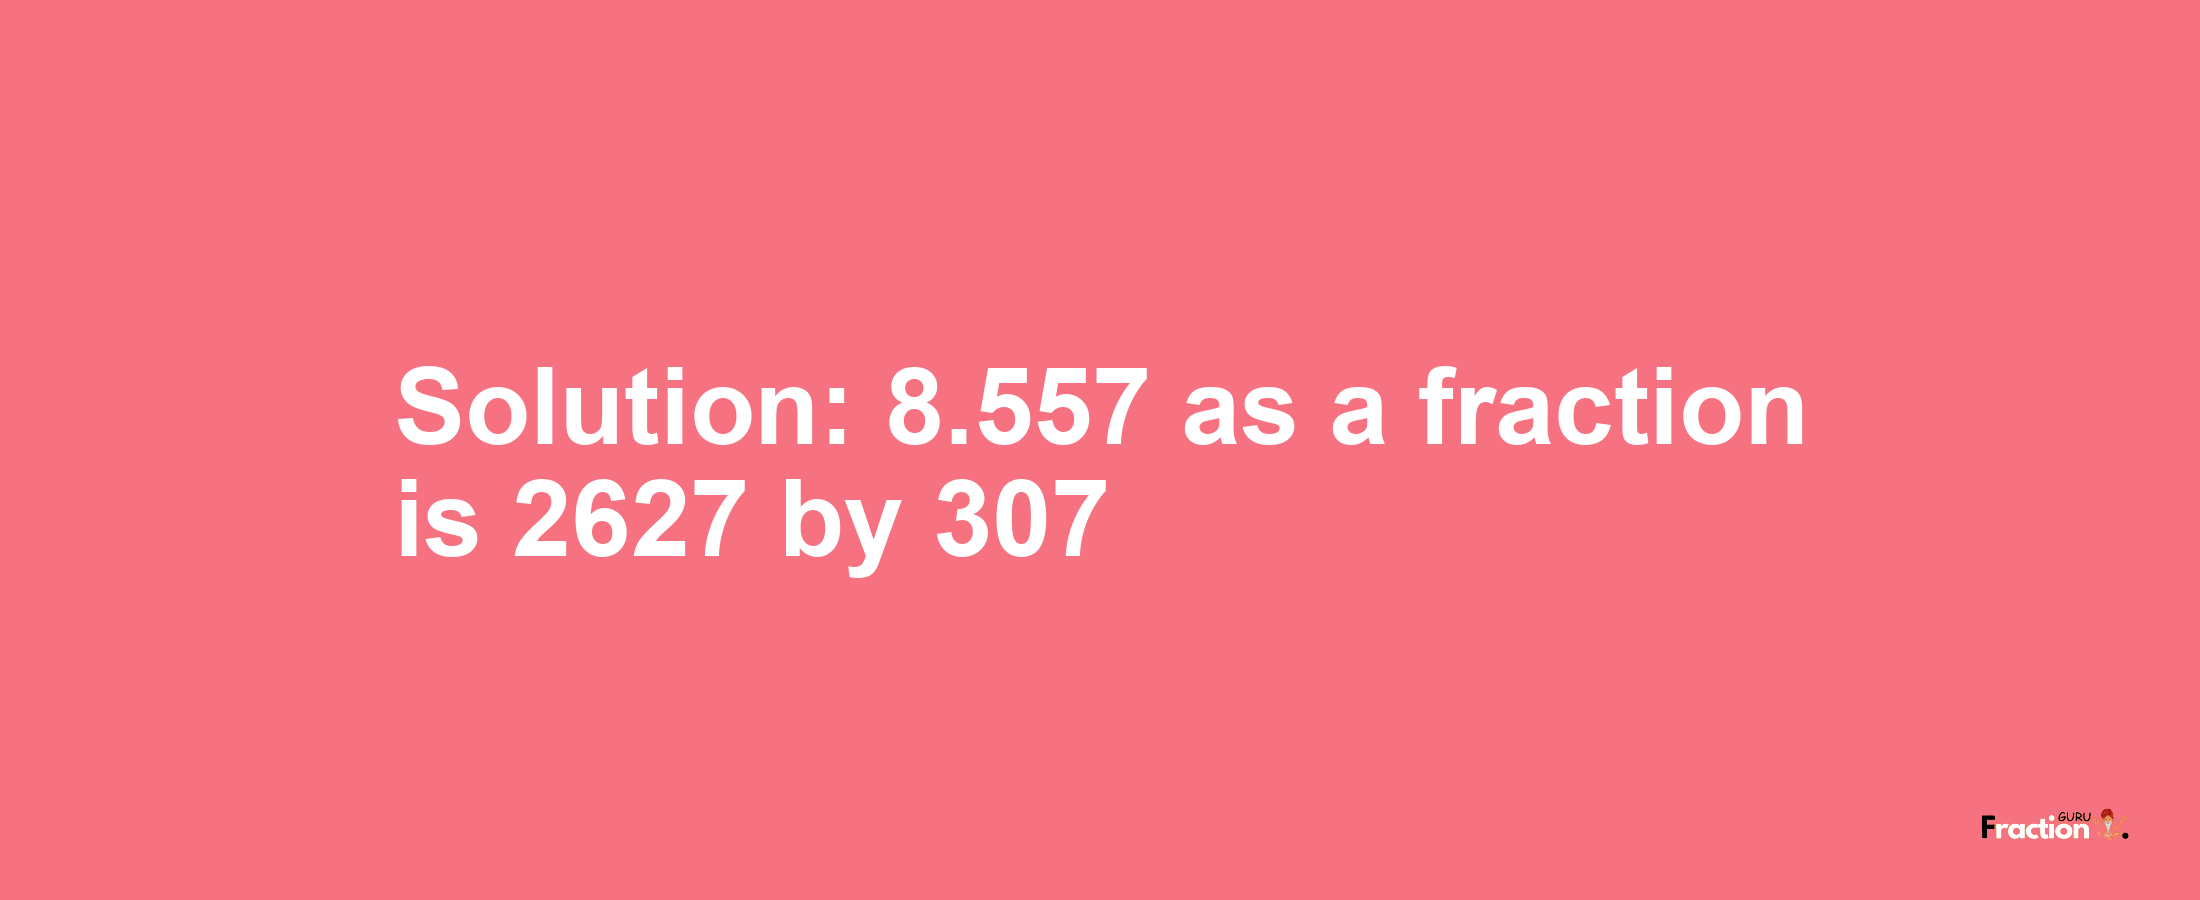 Solution:8.557 as a fraction is 2627/307